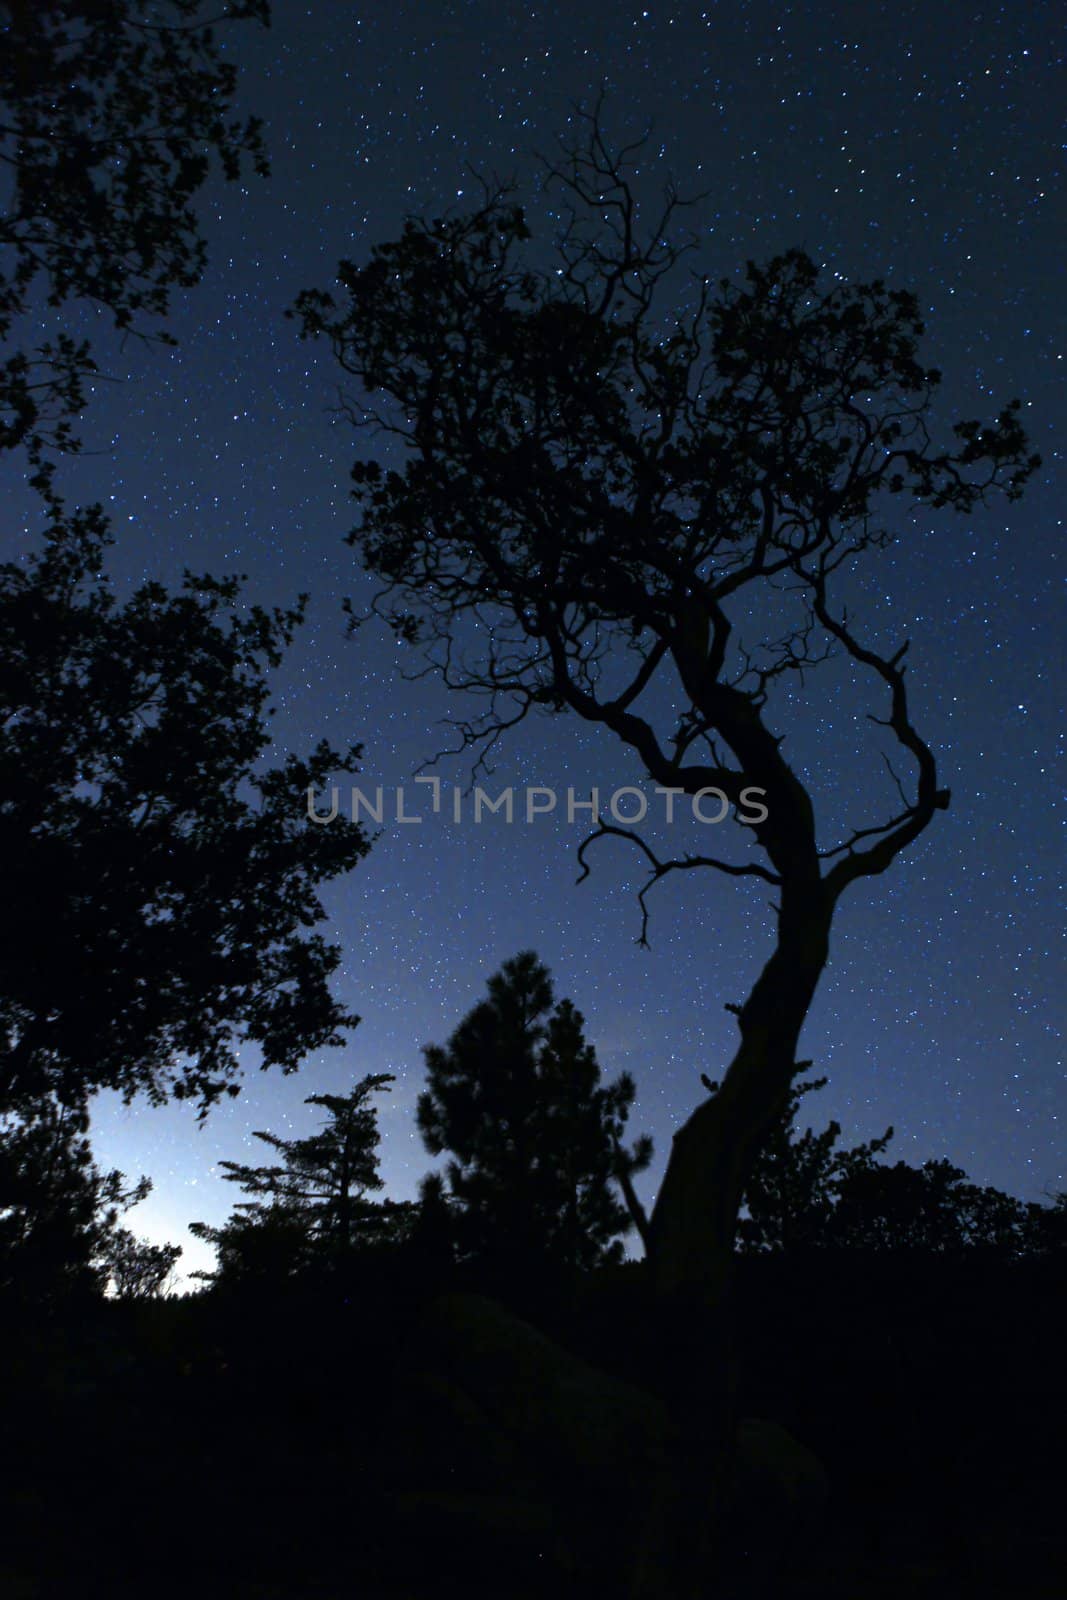 Life Like Tree Silhouette in the Darkness With Only Star Lights. Slight Noise Due to Unavoidable Long Exposure.